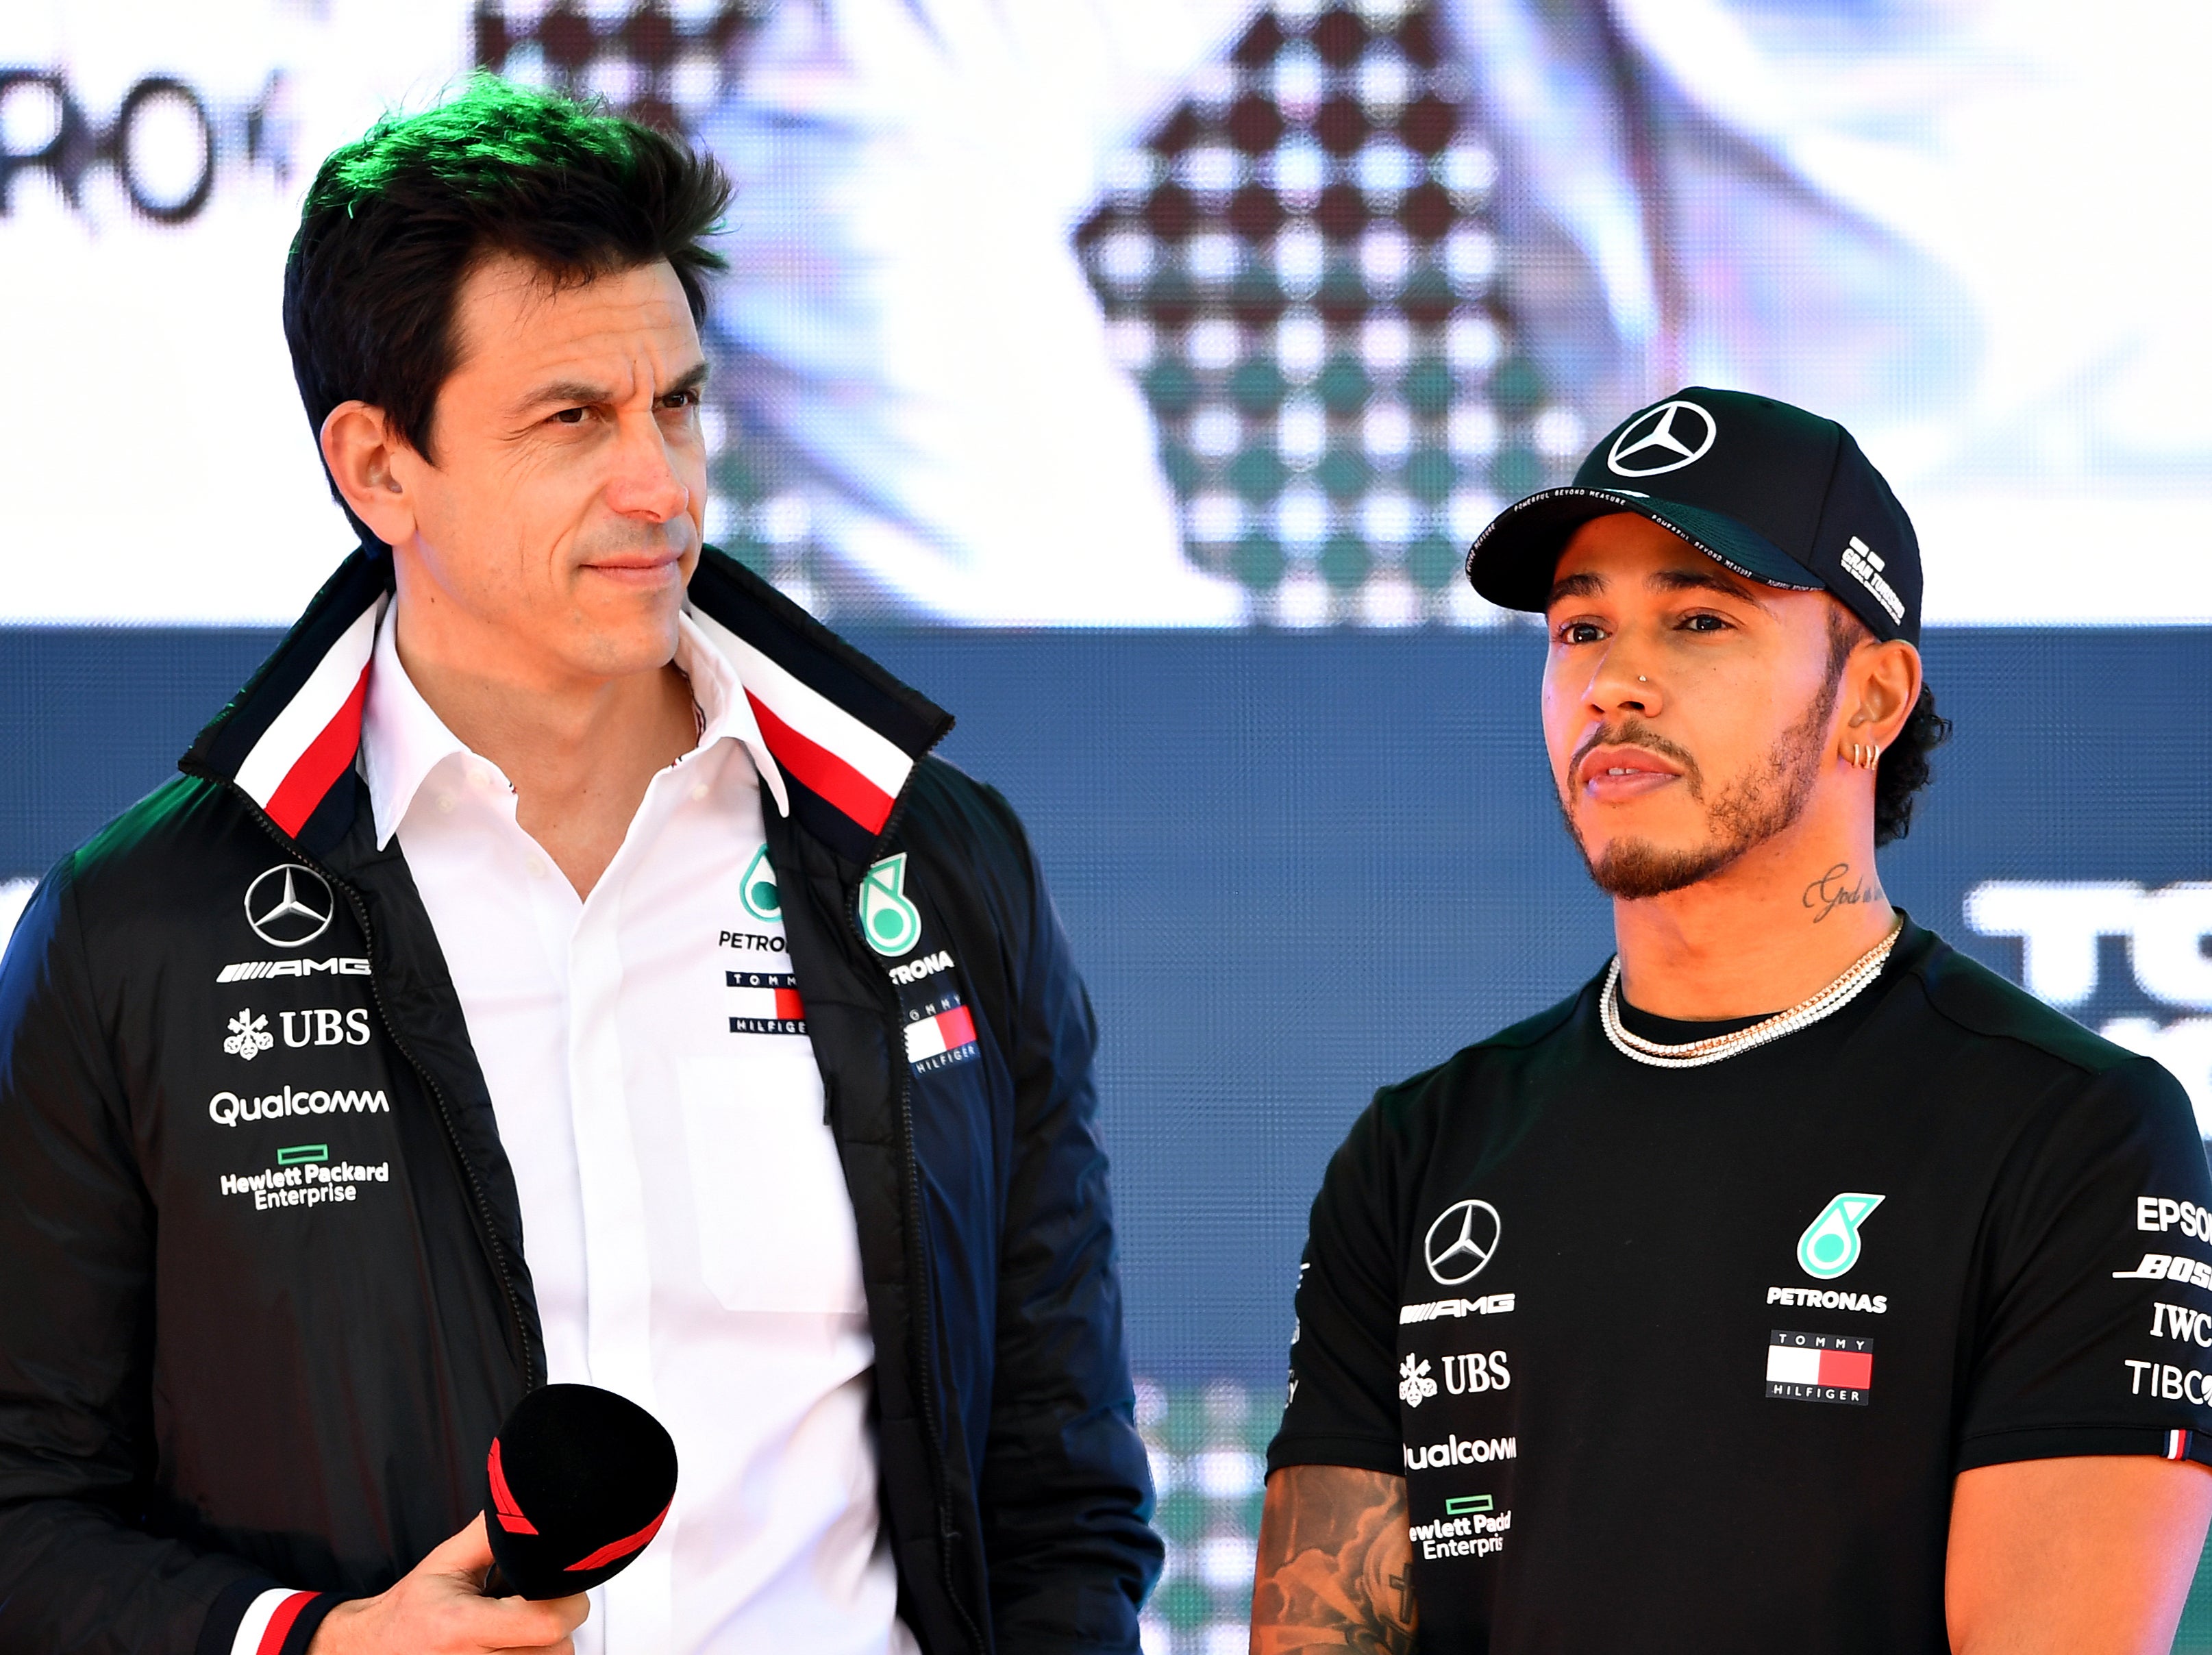 Wolff and Hamilton have their sights set on both championships.